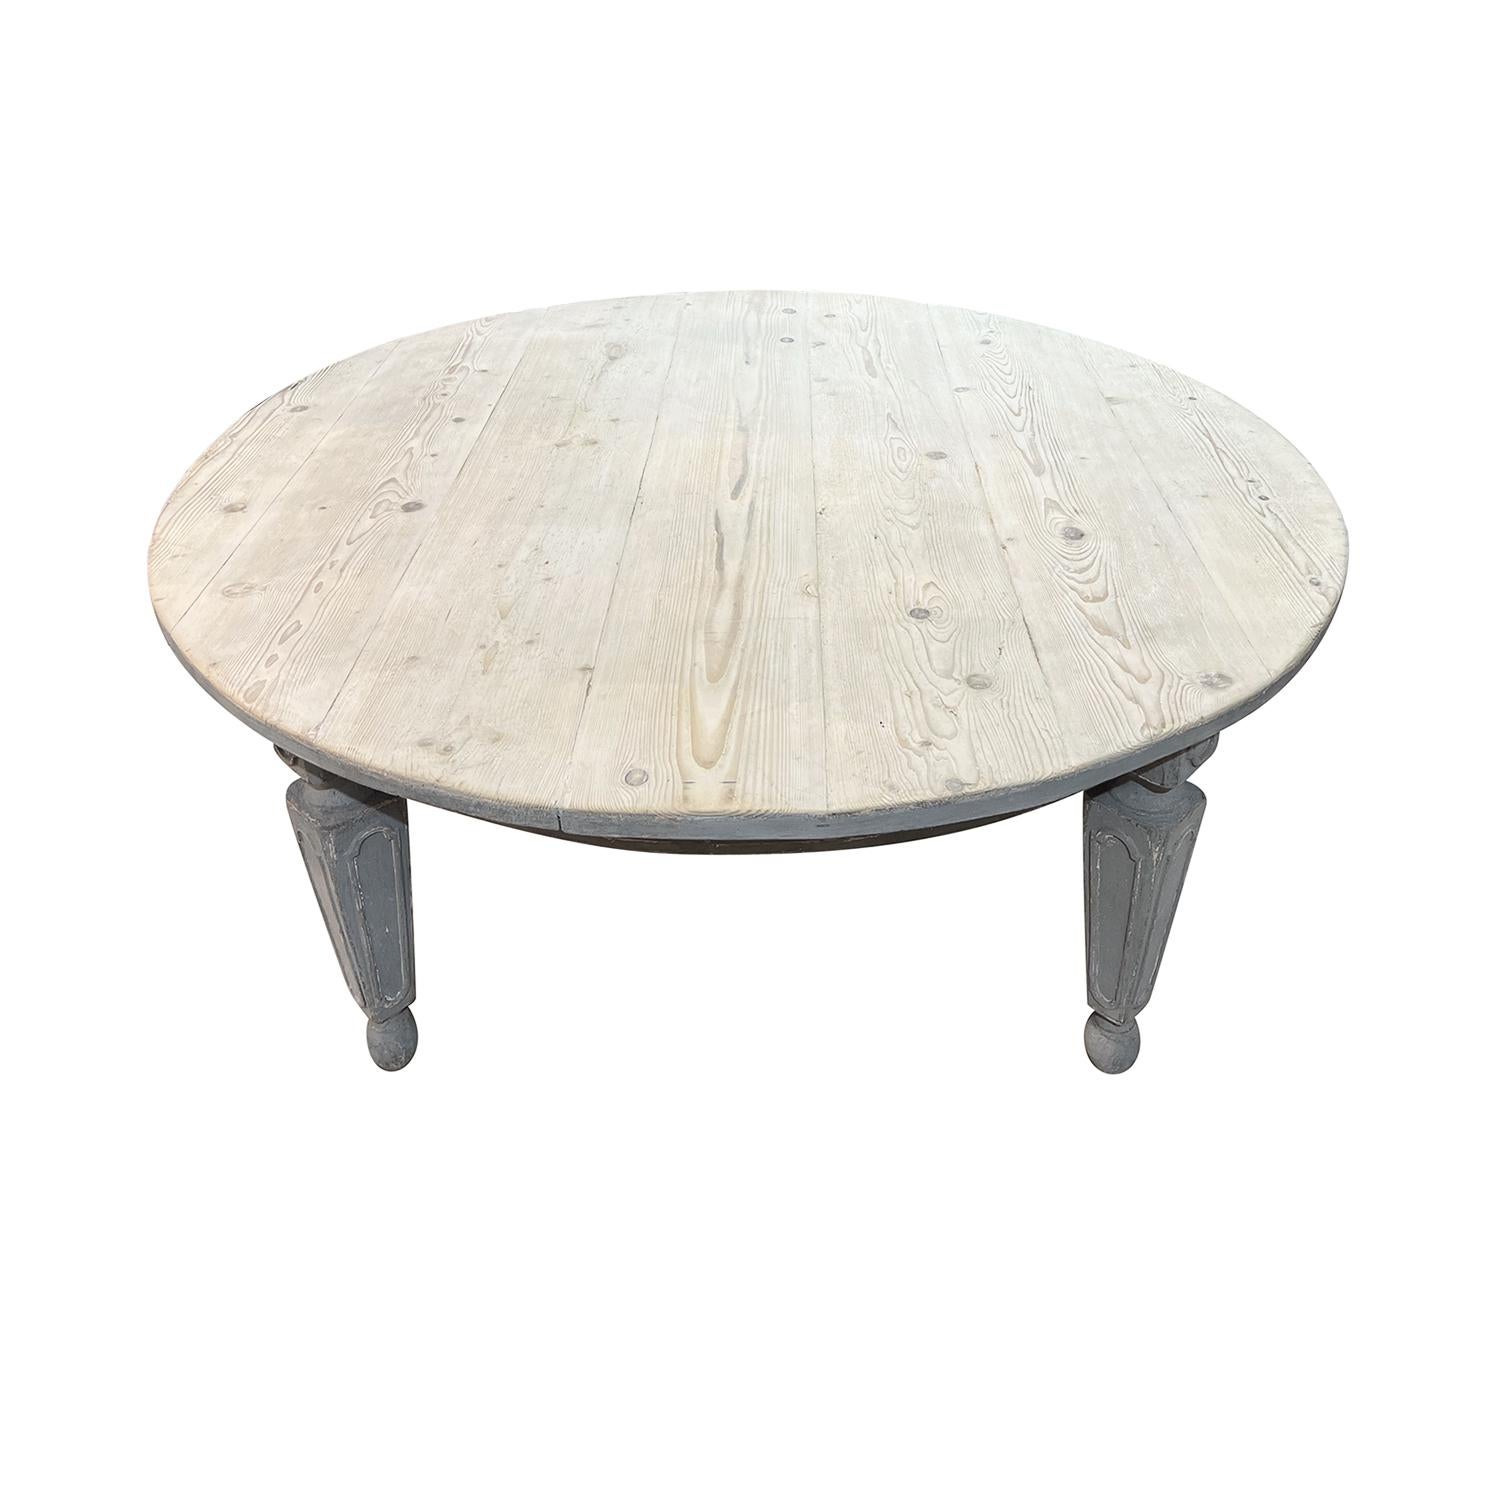 A 19th Century, antique large round dining room table made of hand crafted painted Pinewood, in good condition. The Tuscan conference table is standing on four detailed carved wooden legs, particularized with its original grey-blue patina, the table